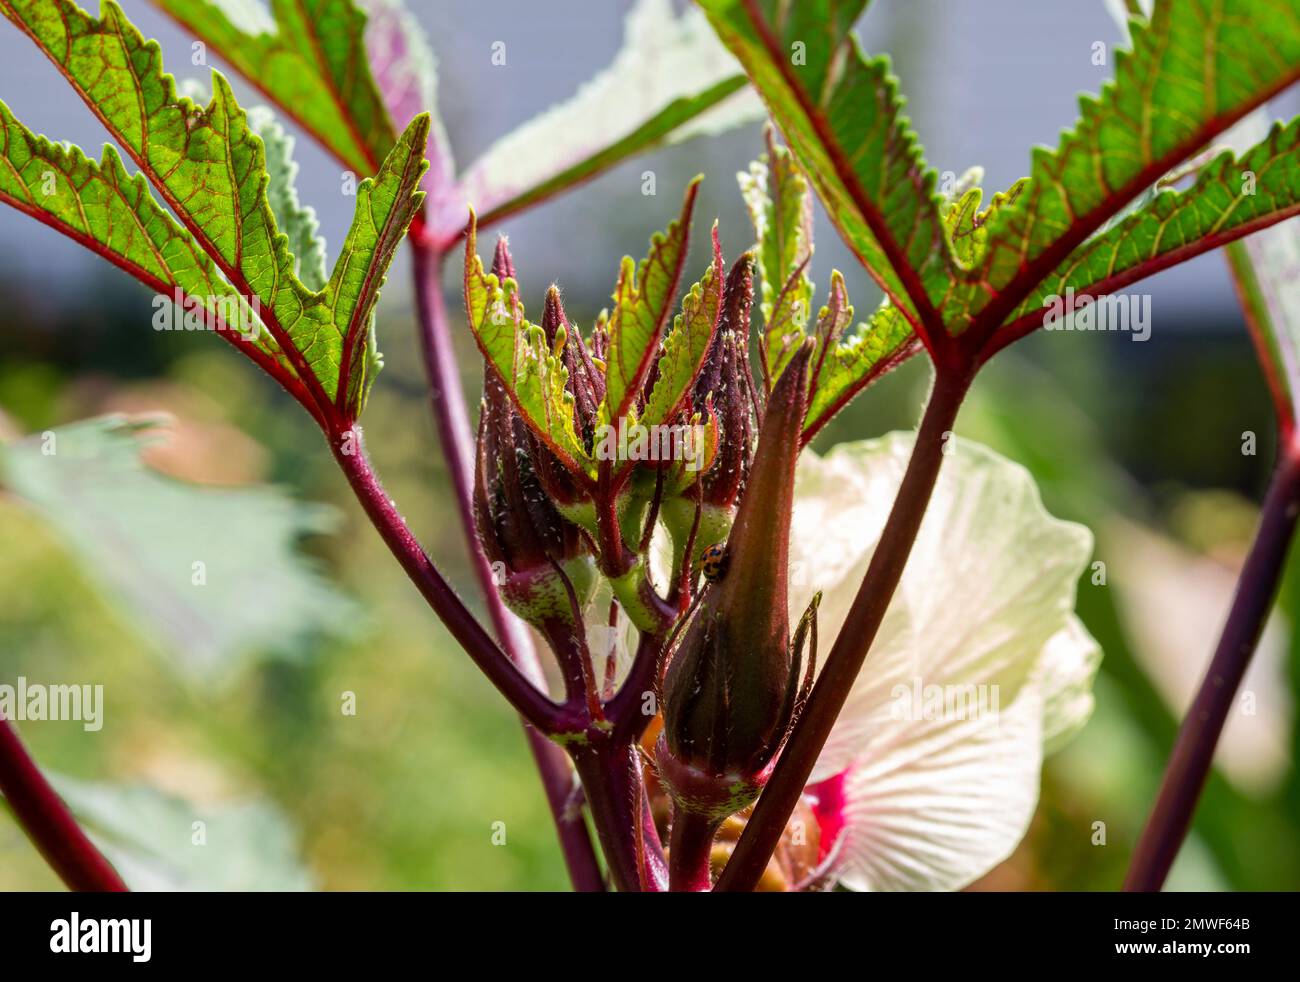 Okra, Abelmoschus esculentus, is a perennial flowering plant in the mallow family. Stock Photo